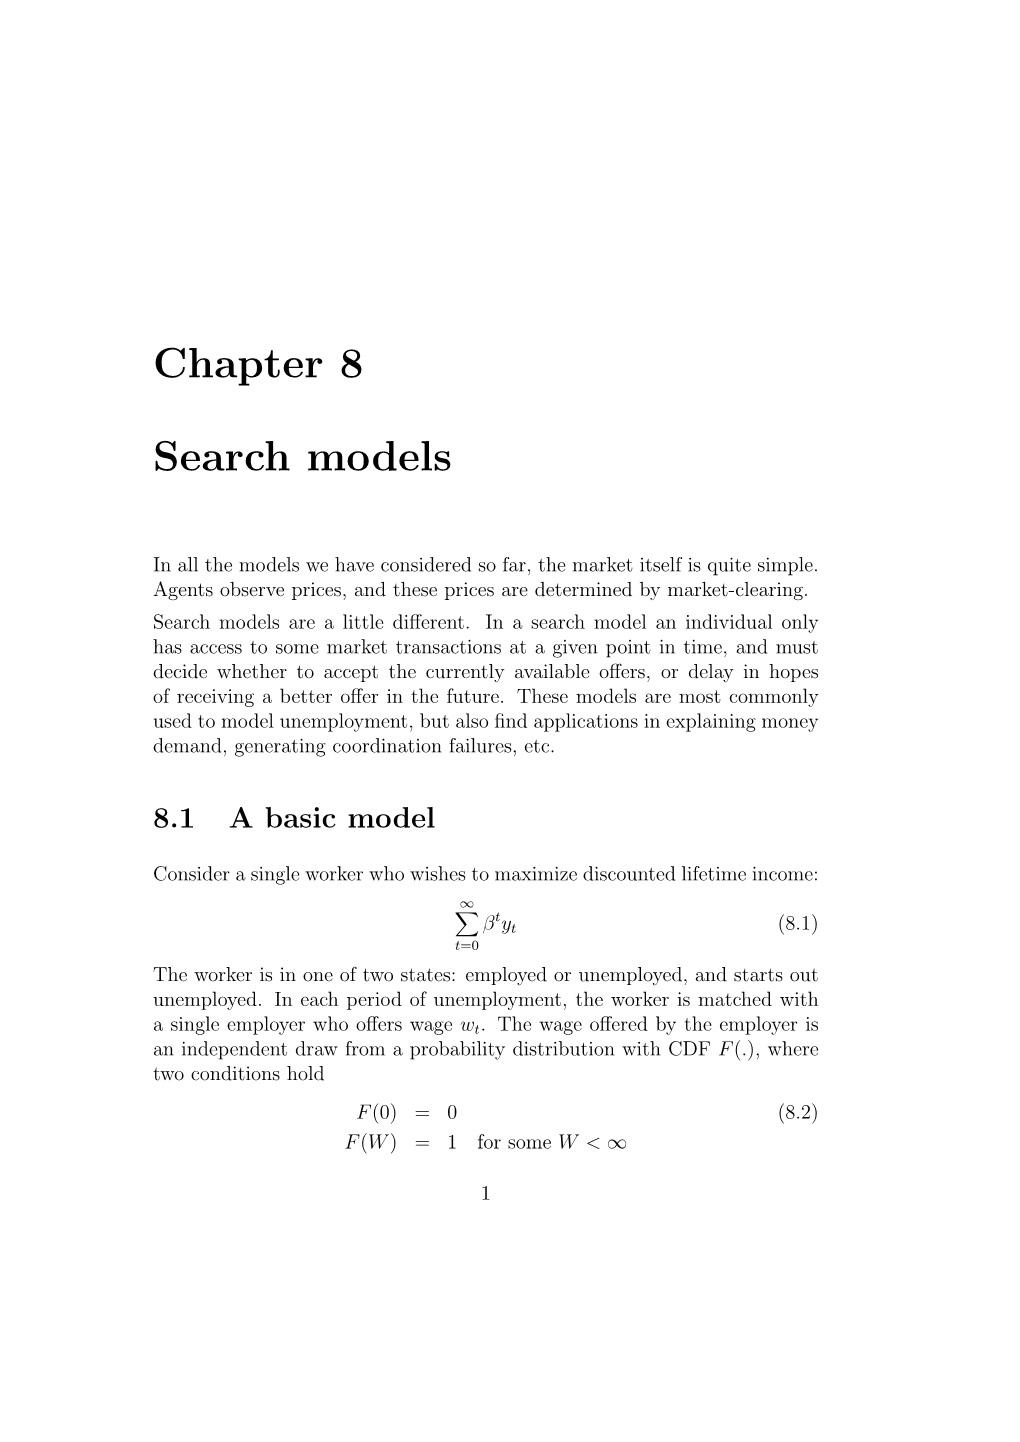 Chapter 8 Search Models